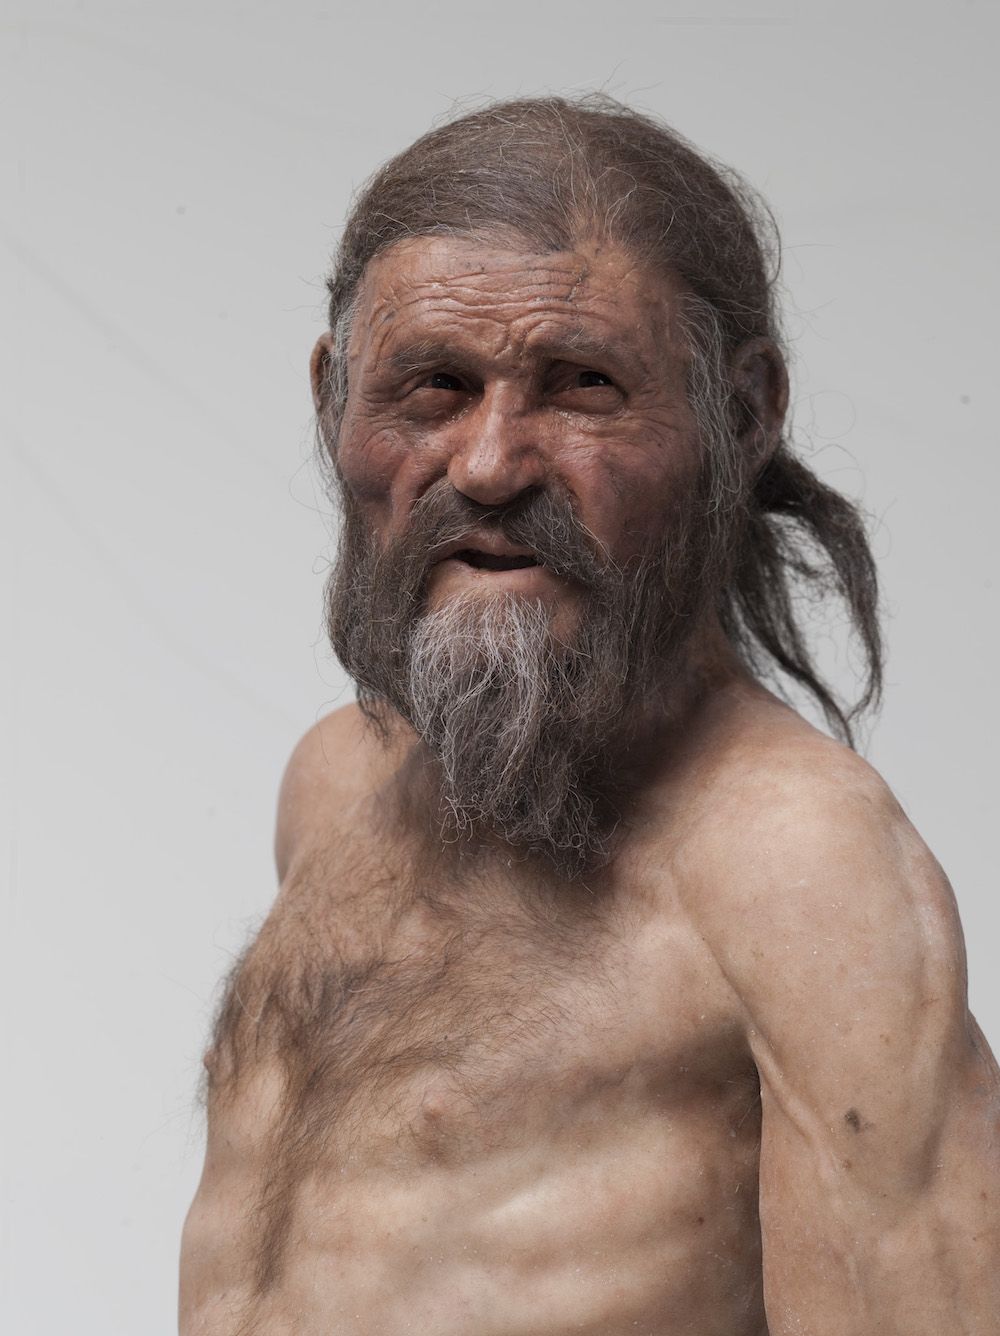 Otzi The Iceman May Have Suffered Stomach Bug Live Science